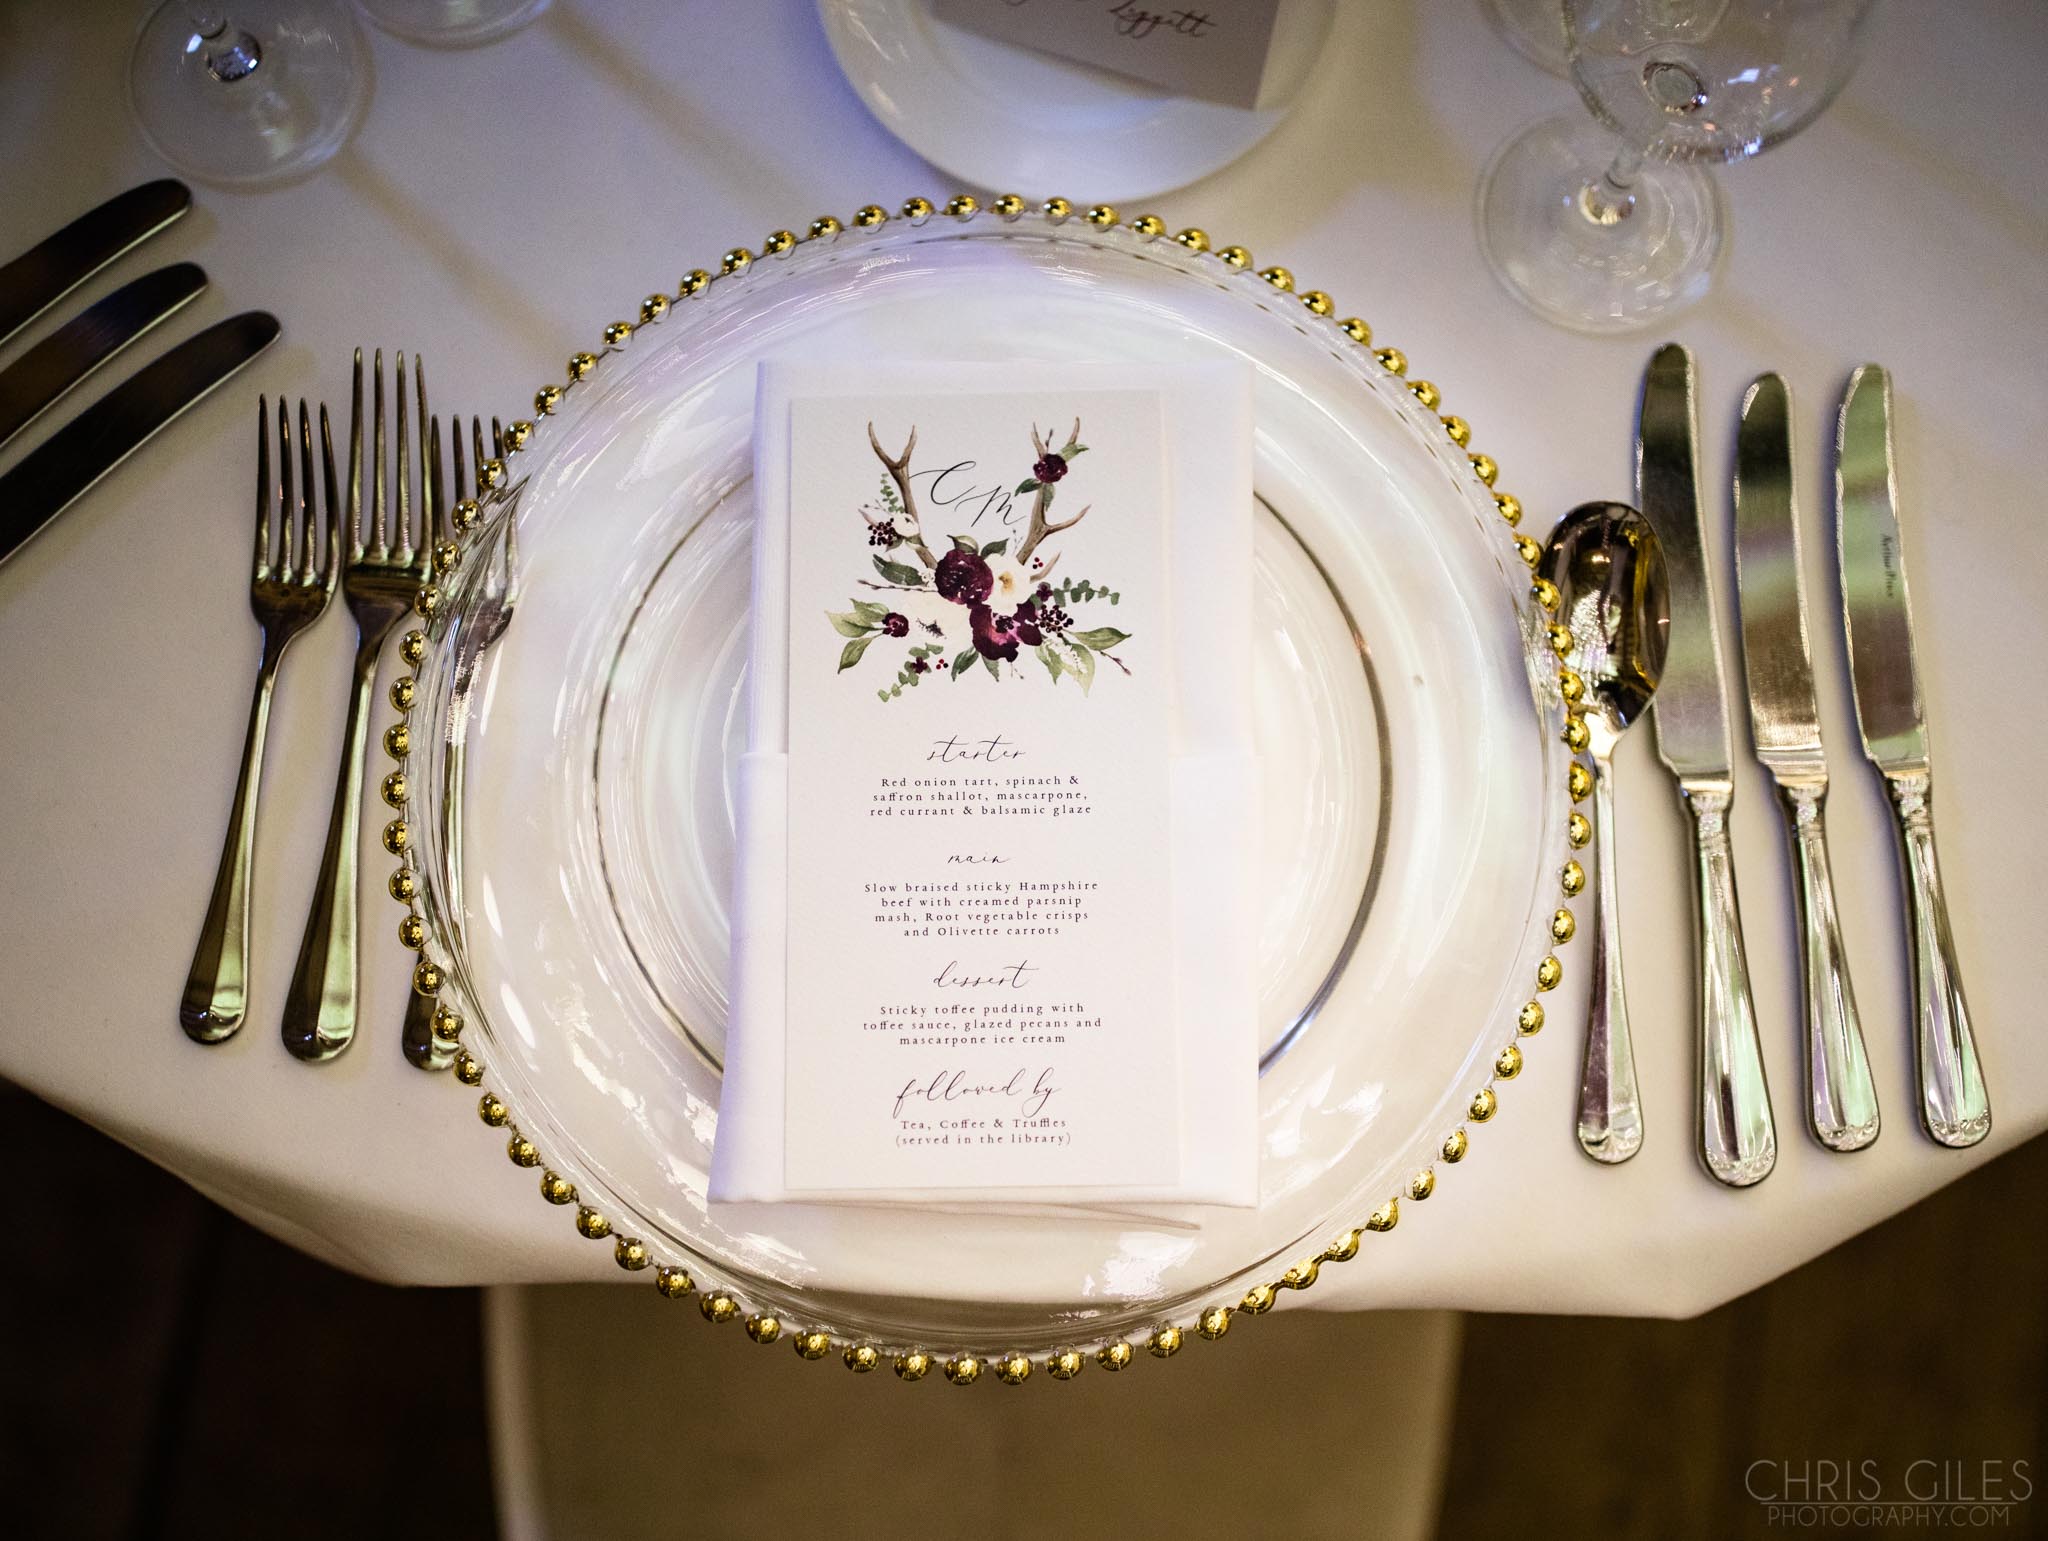 Gold rimmed cutlery and crockery for a wedding